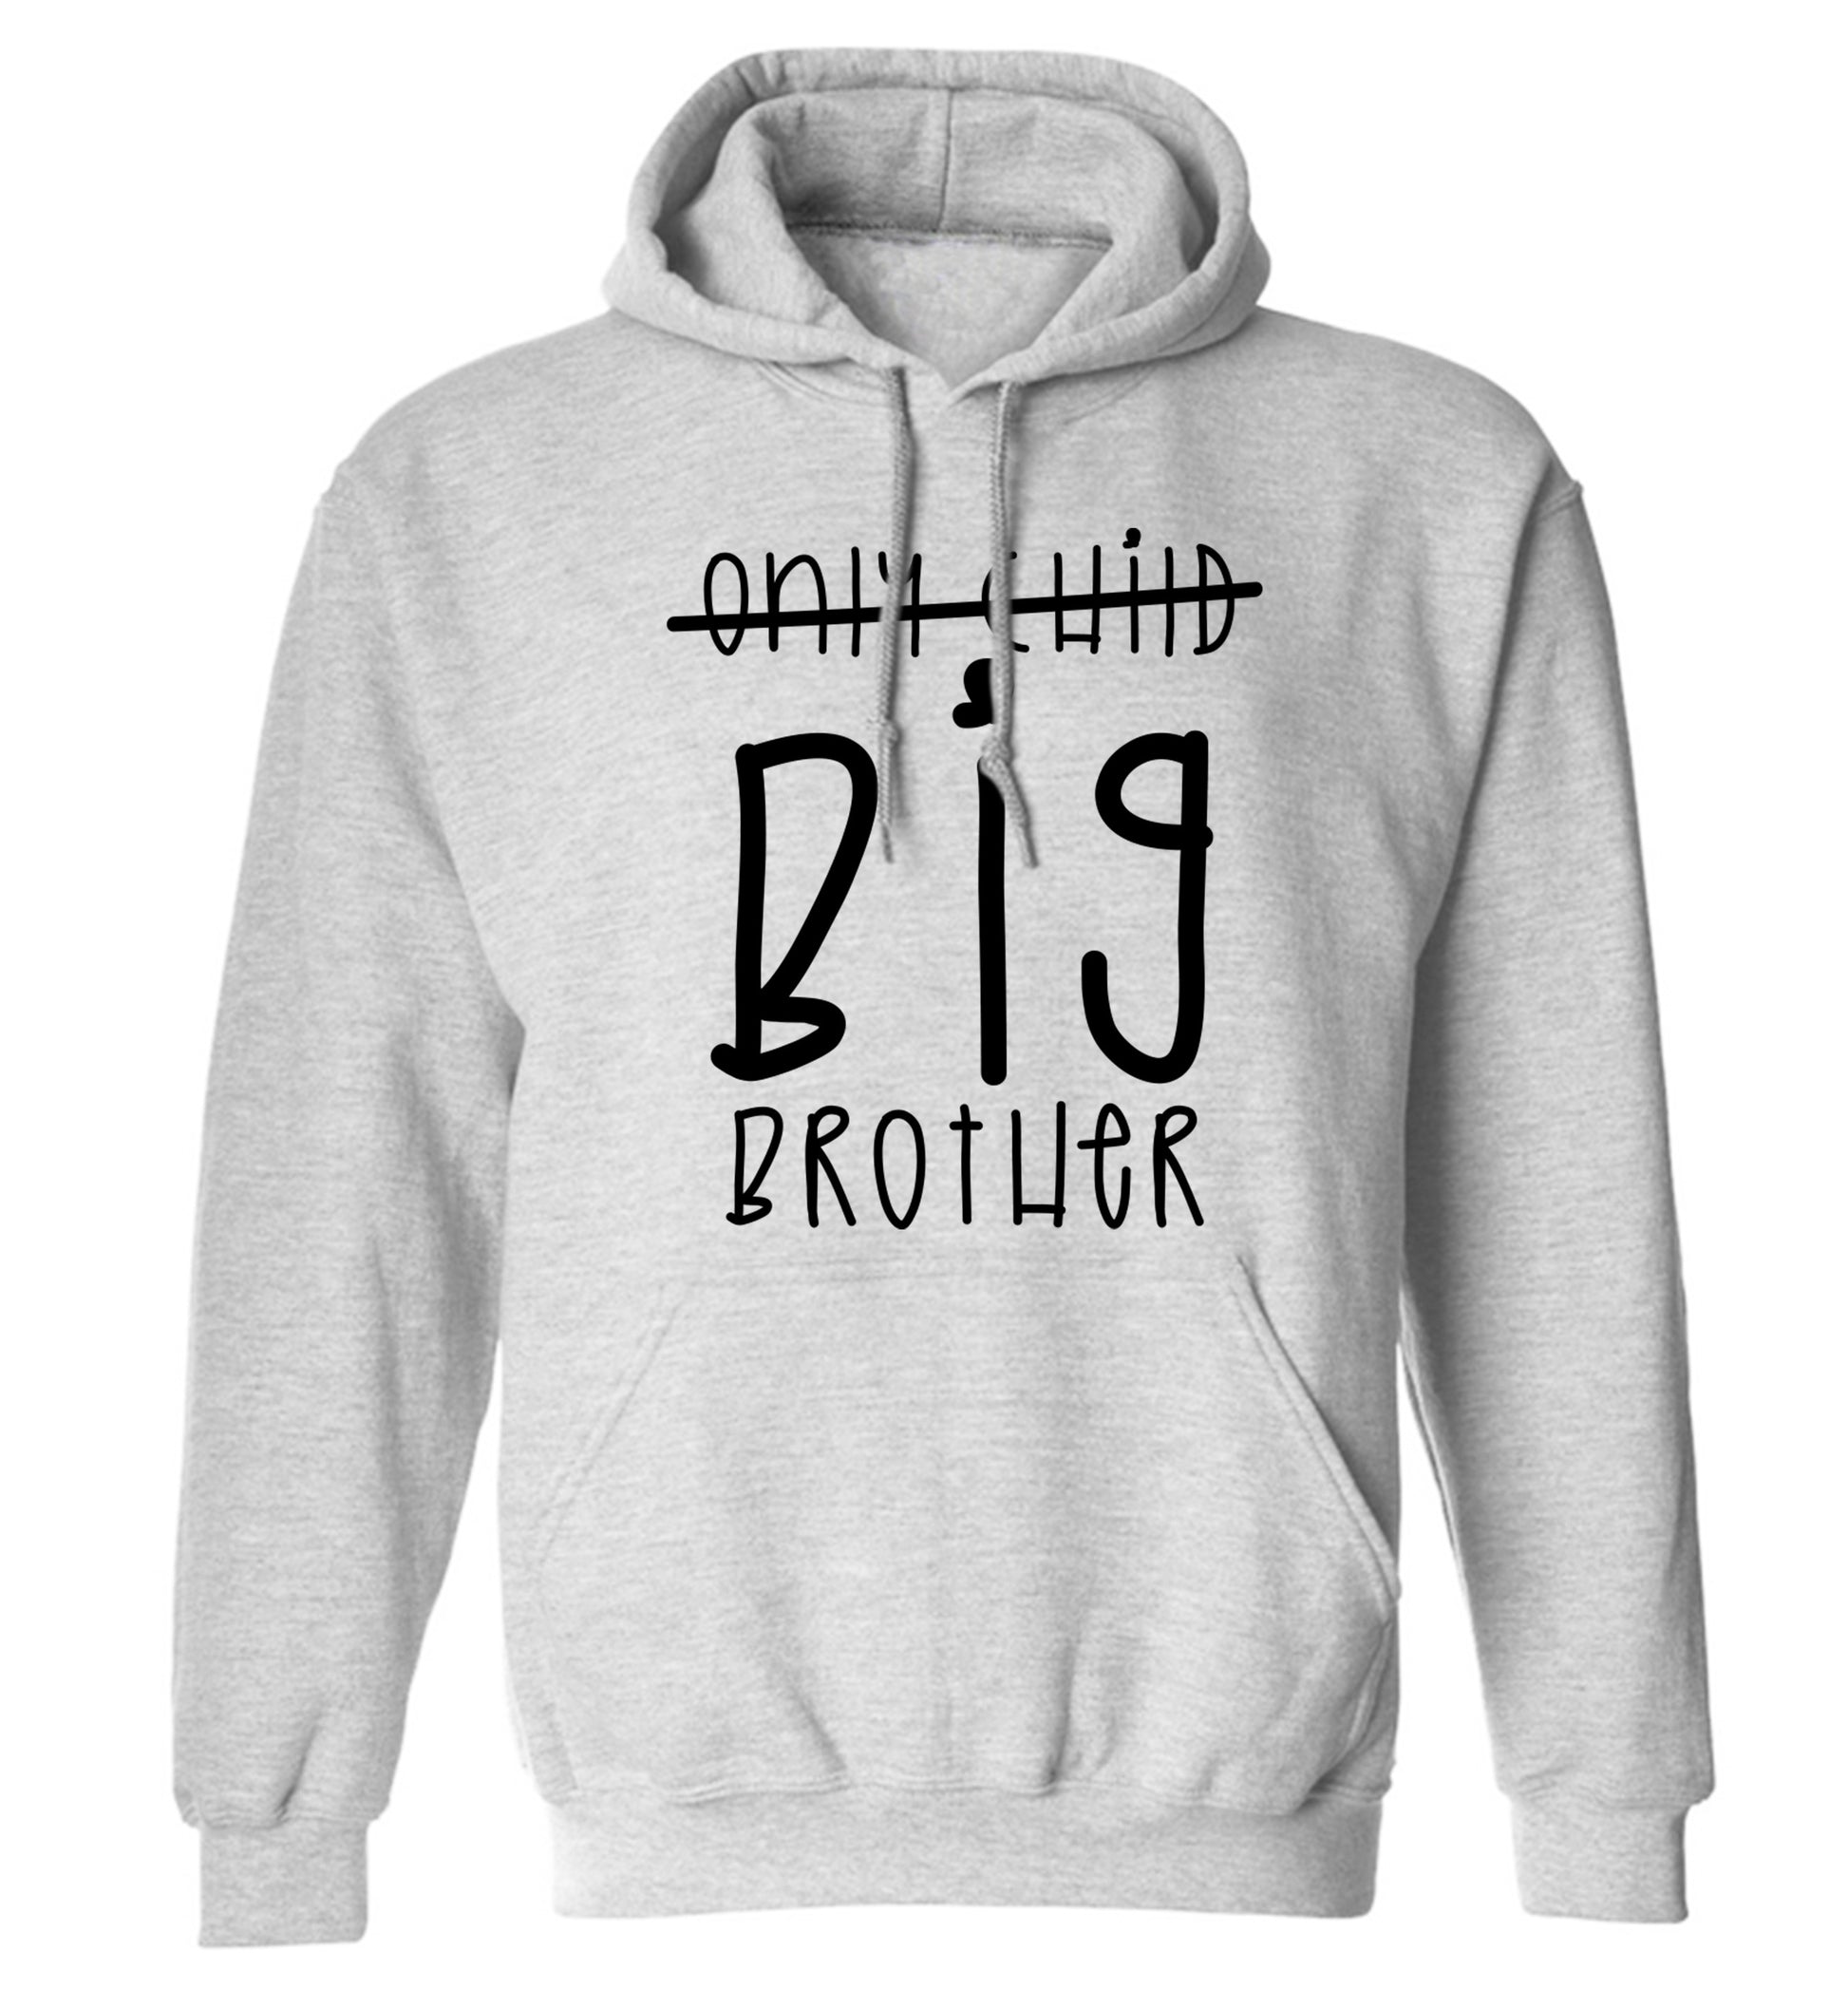 Only child big brother adults unisex grey hoodie 2XL